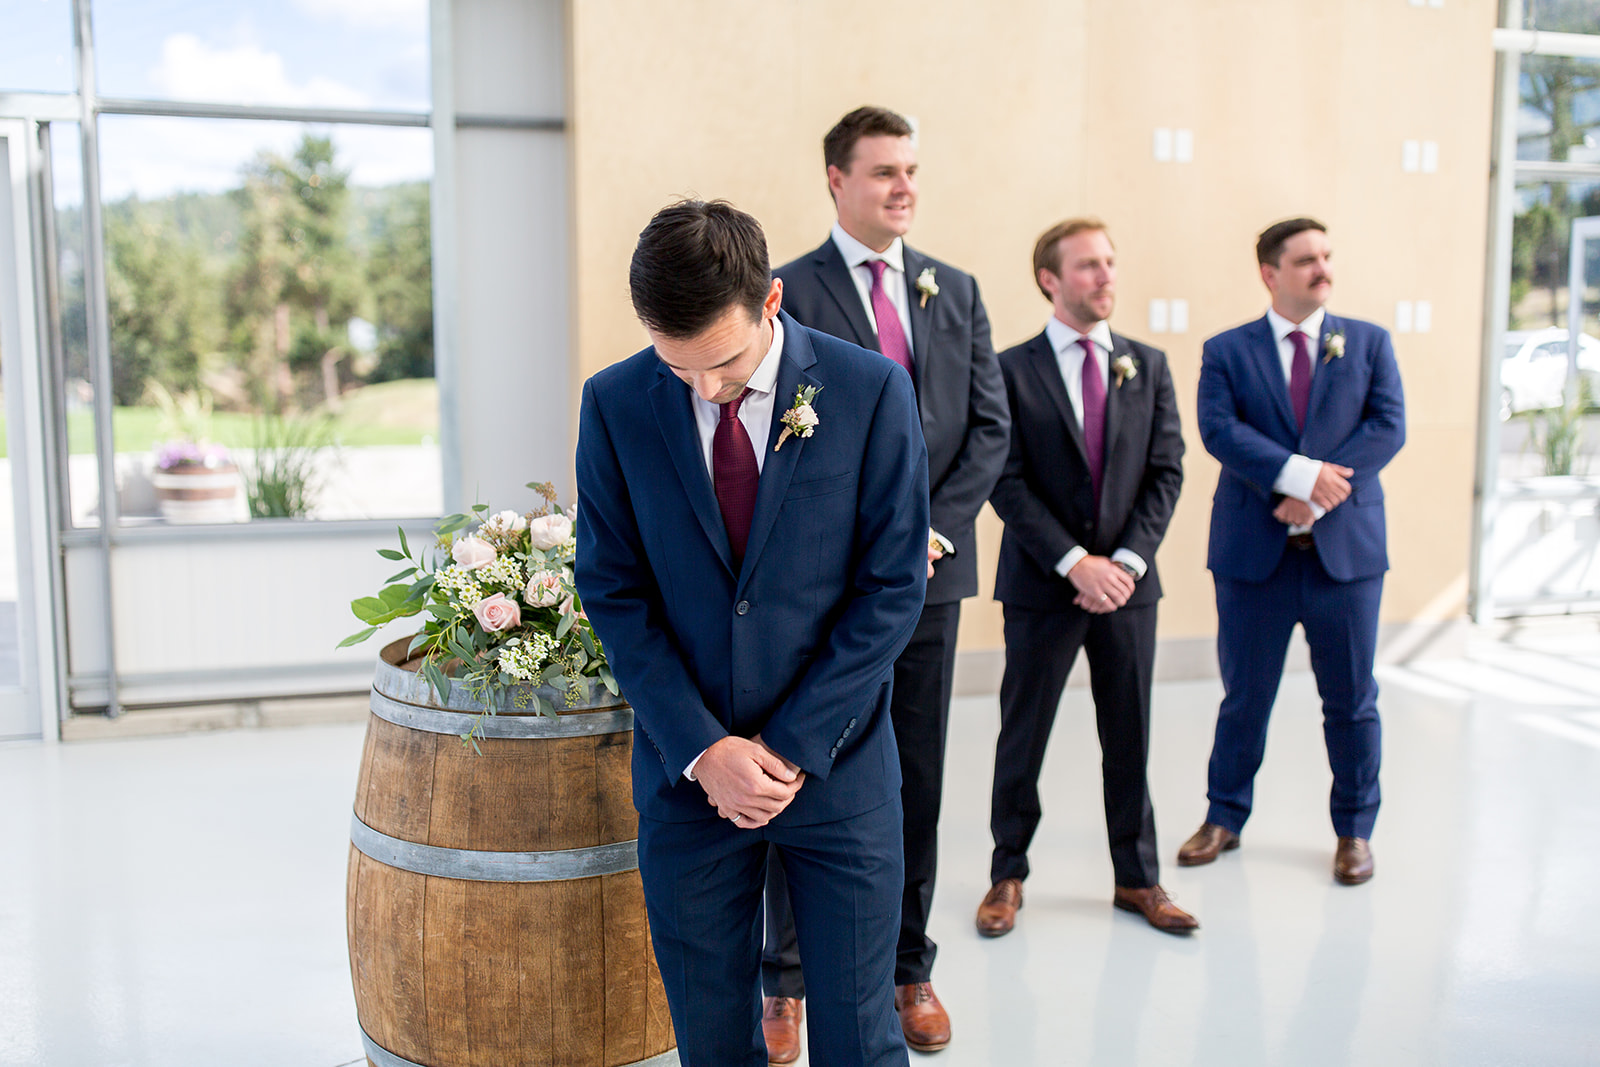 Groom stands at the altar inside a greenhouse waiting for his bride to arrive and walk down the aisle